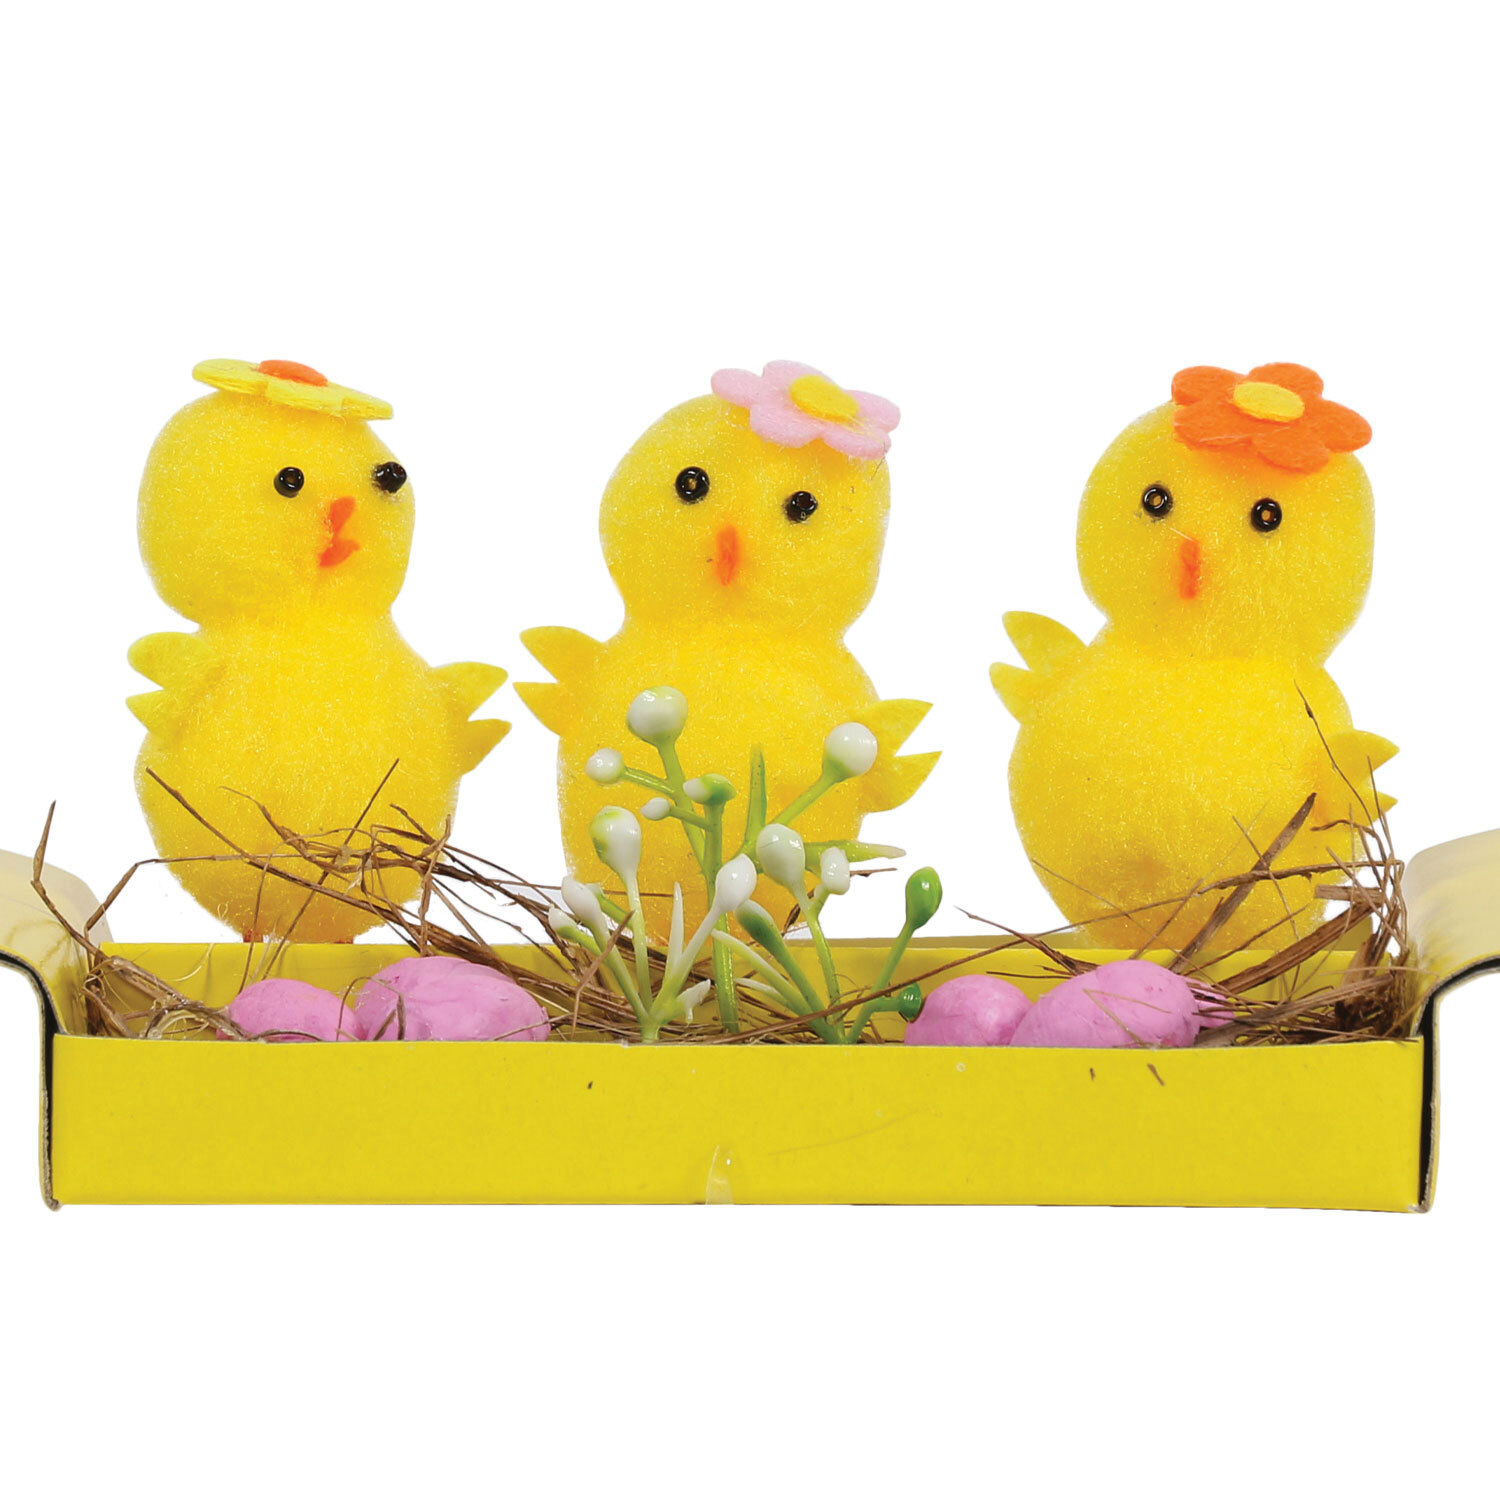 Chicks and Eggs Image